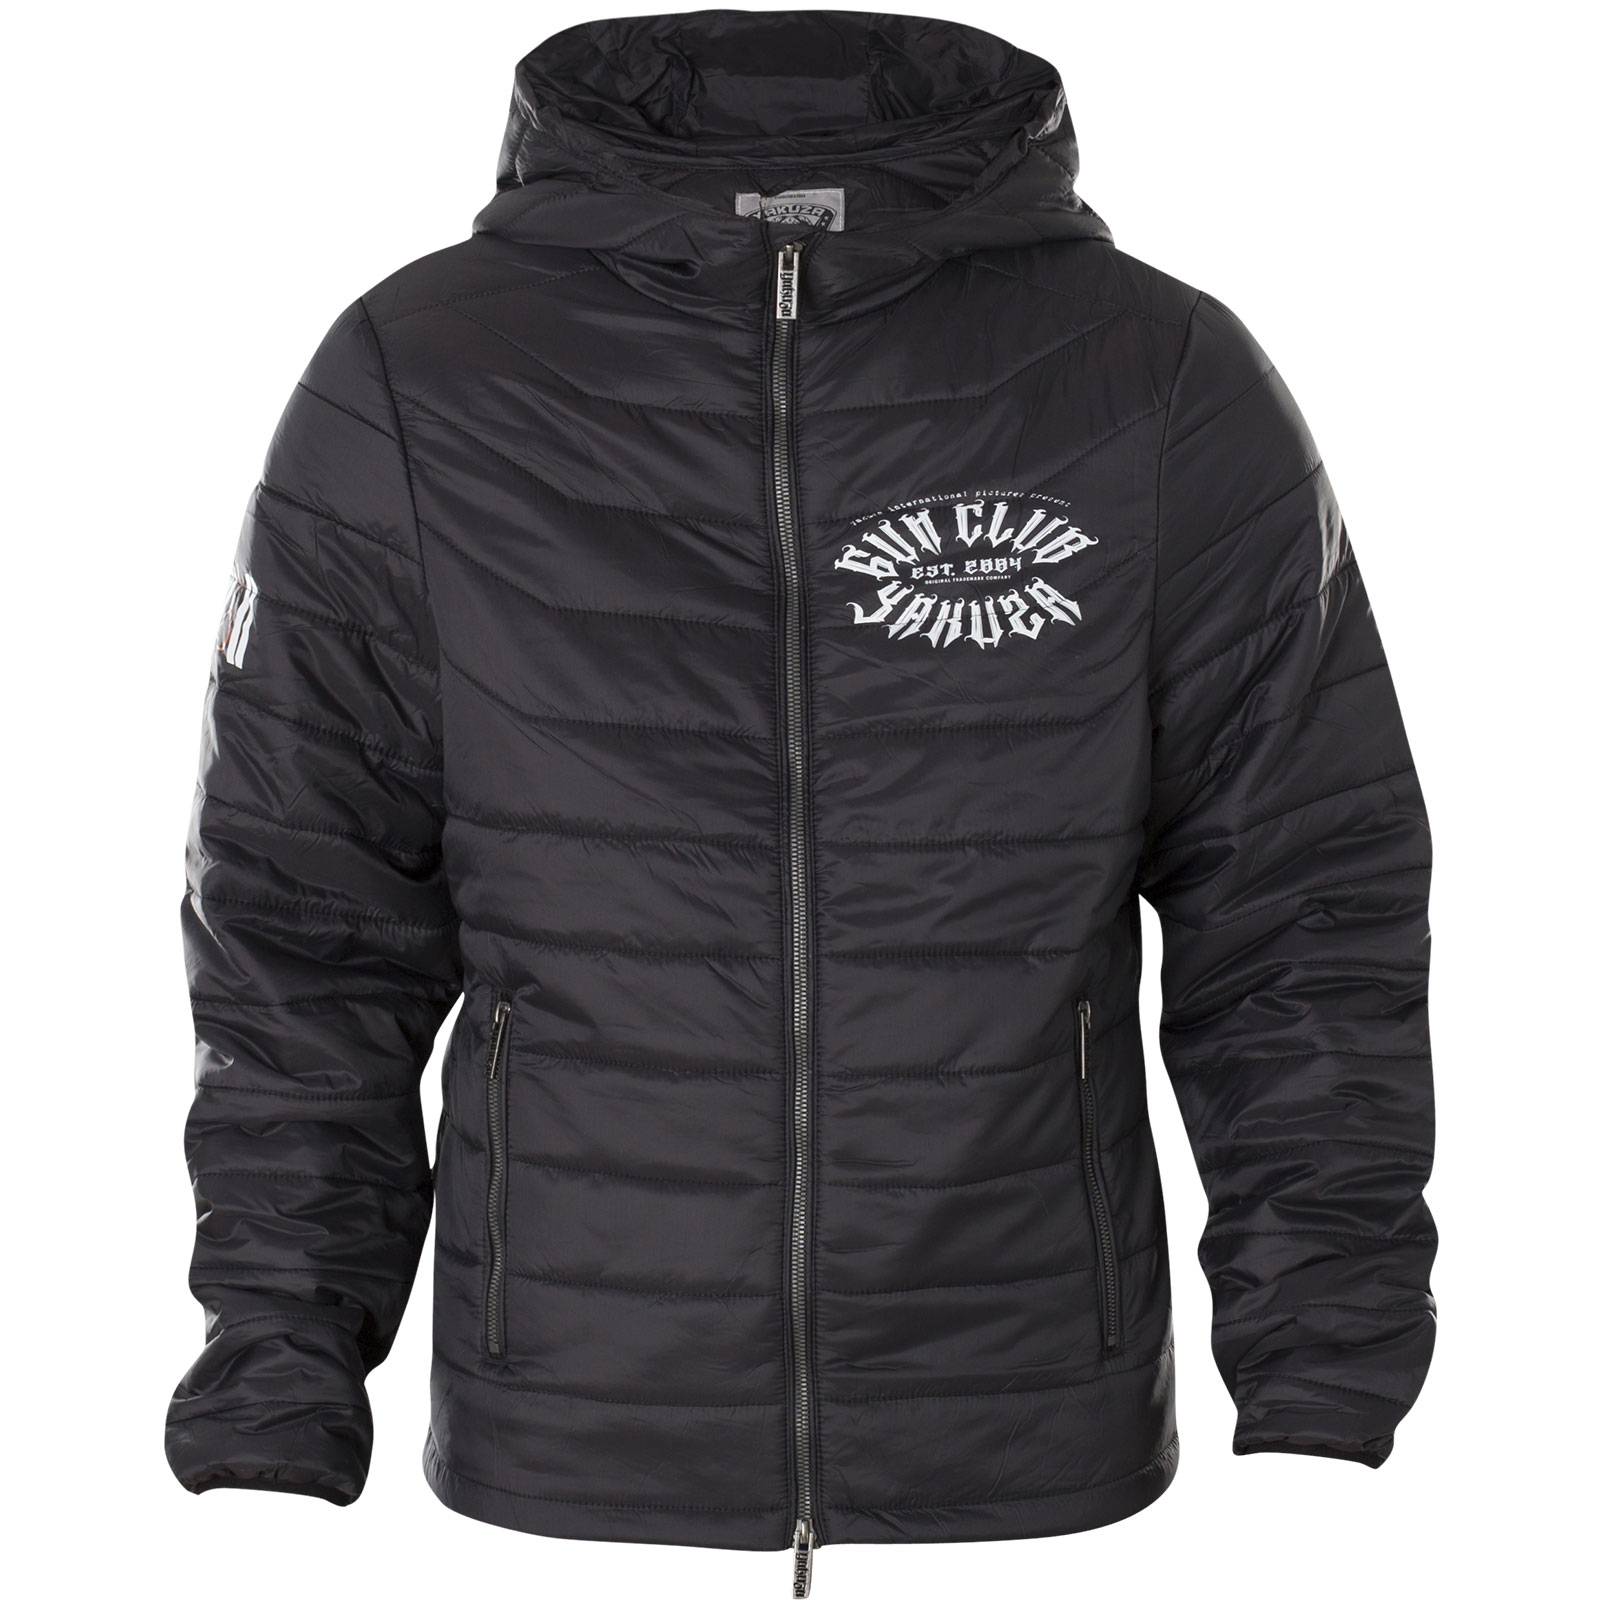 Yakuza Gun Club Quilted Hooded Jacket with lettering